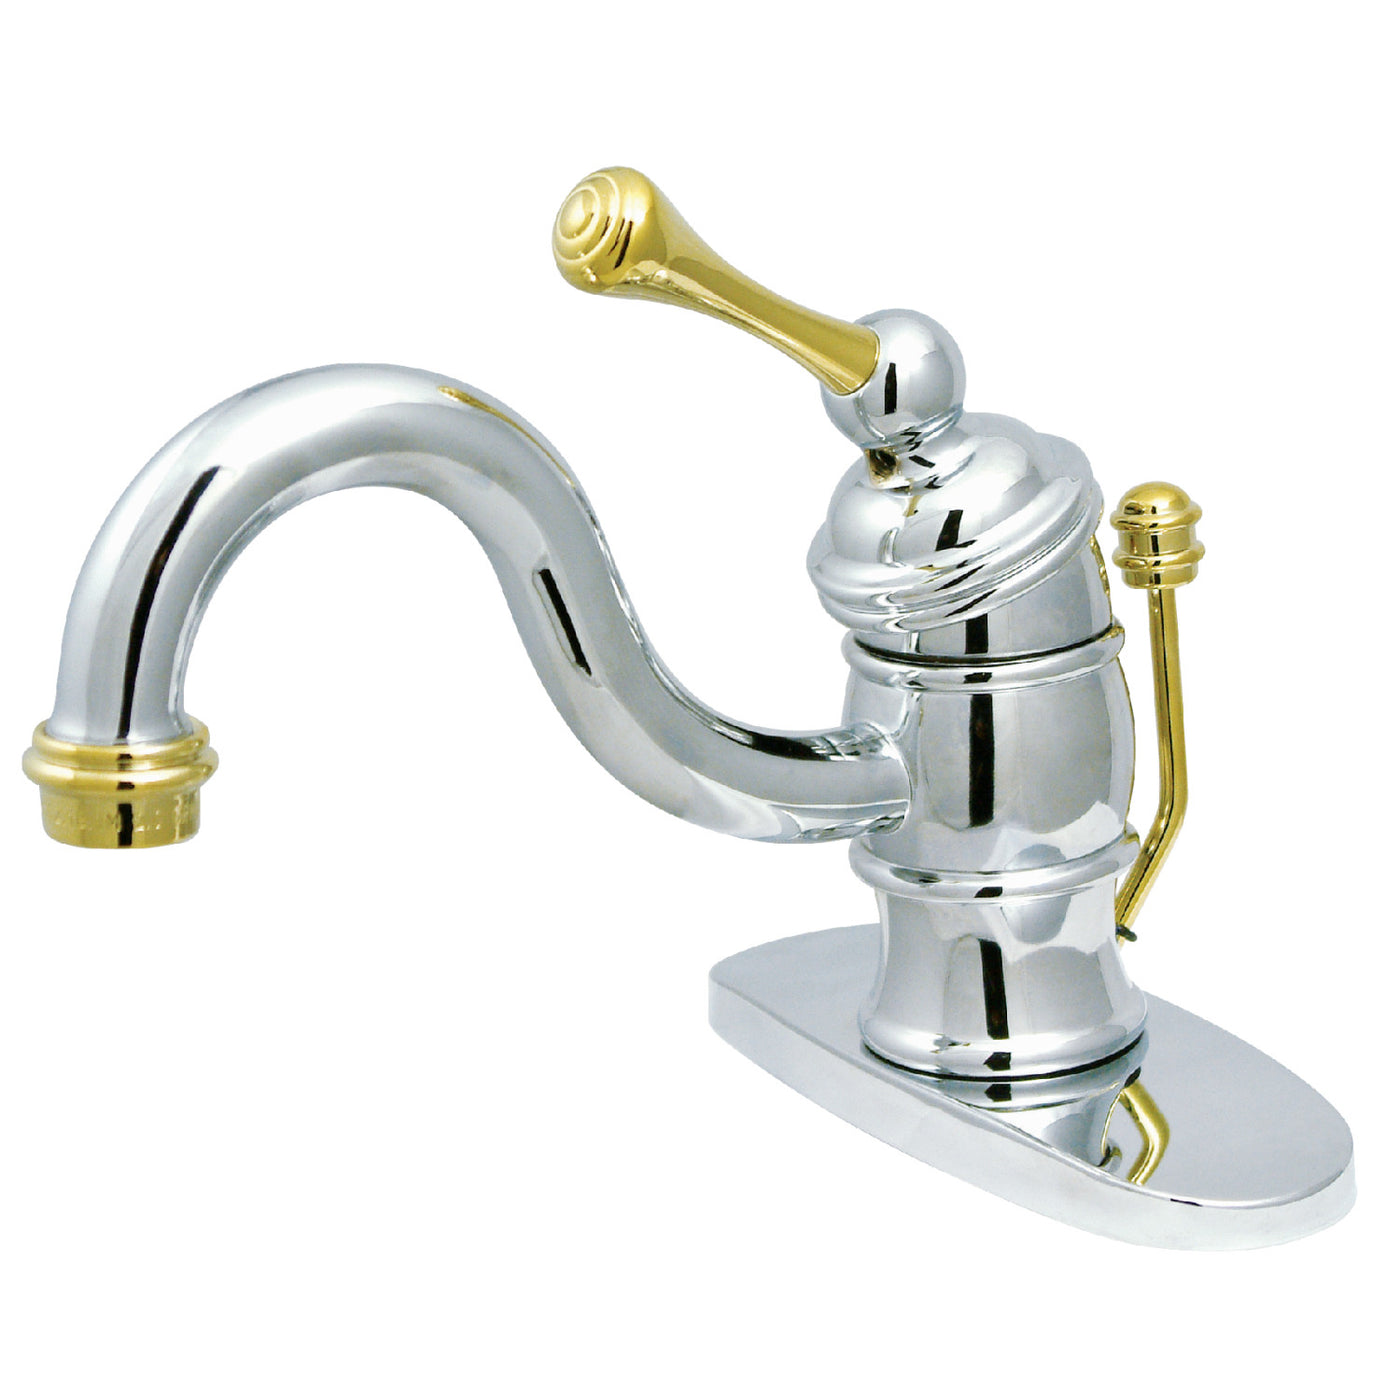 Elements of Design EB3404BL Single-Handle Bathroom Faucet with Pop-Up Drain, Polished Chrome/Polished Brass